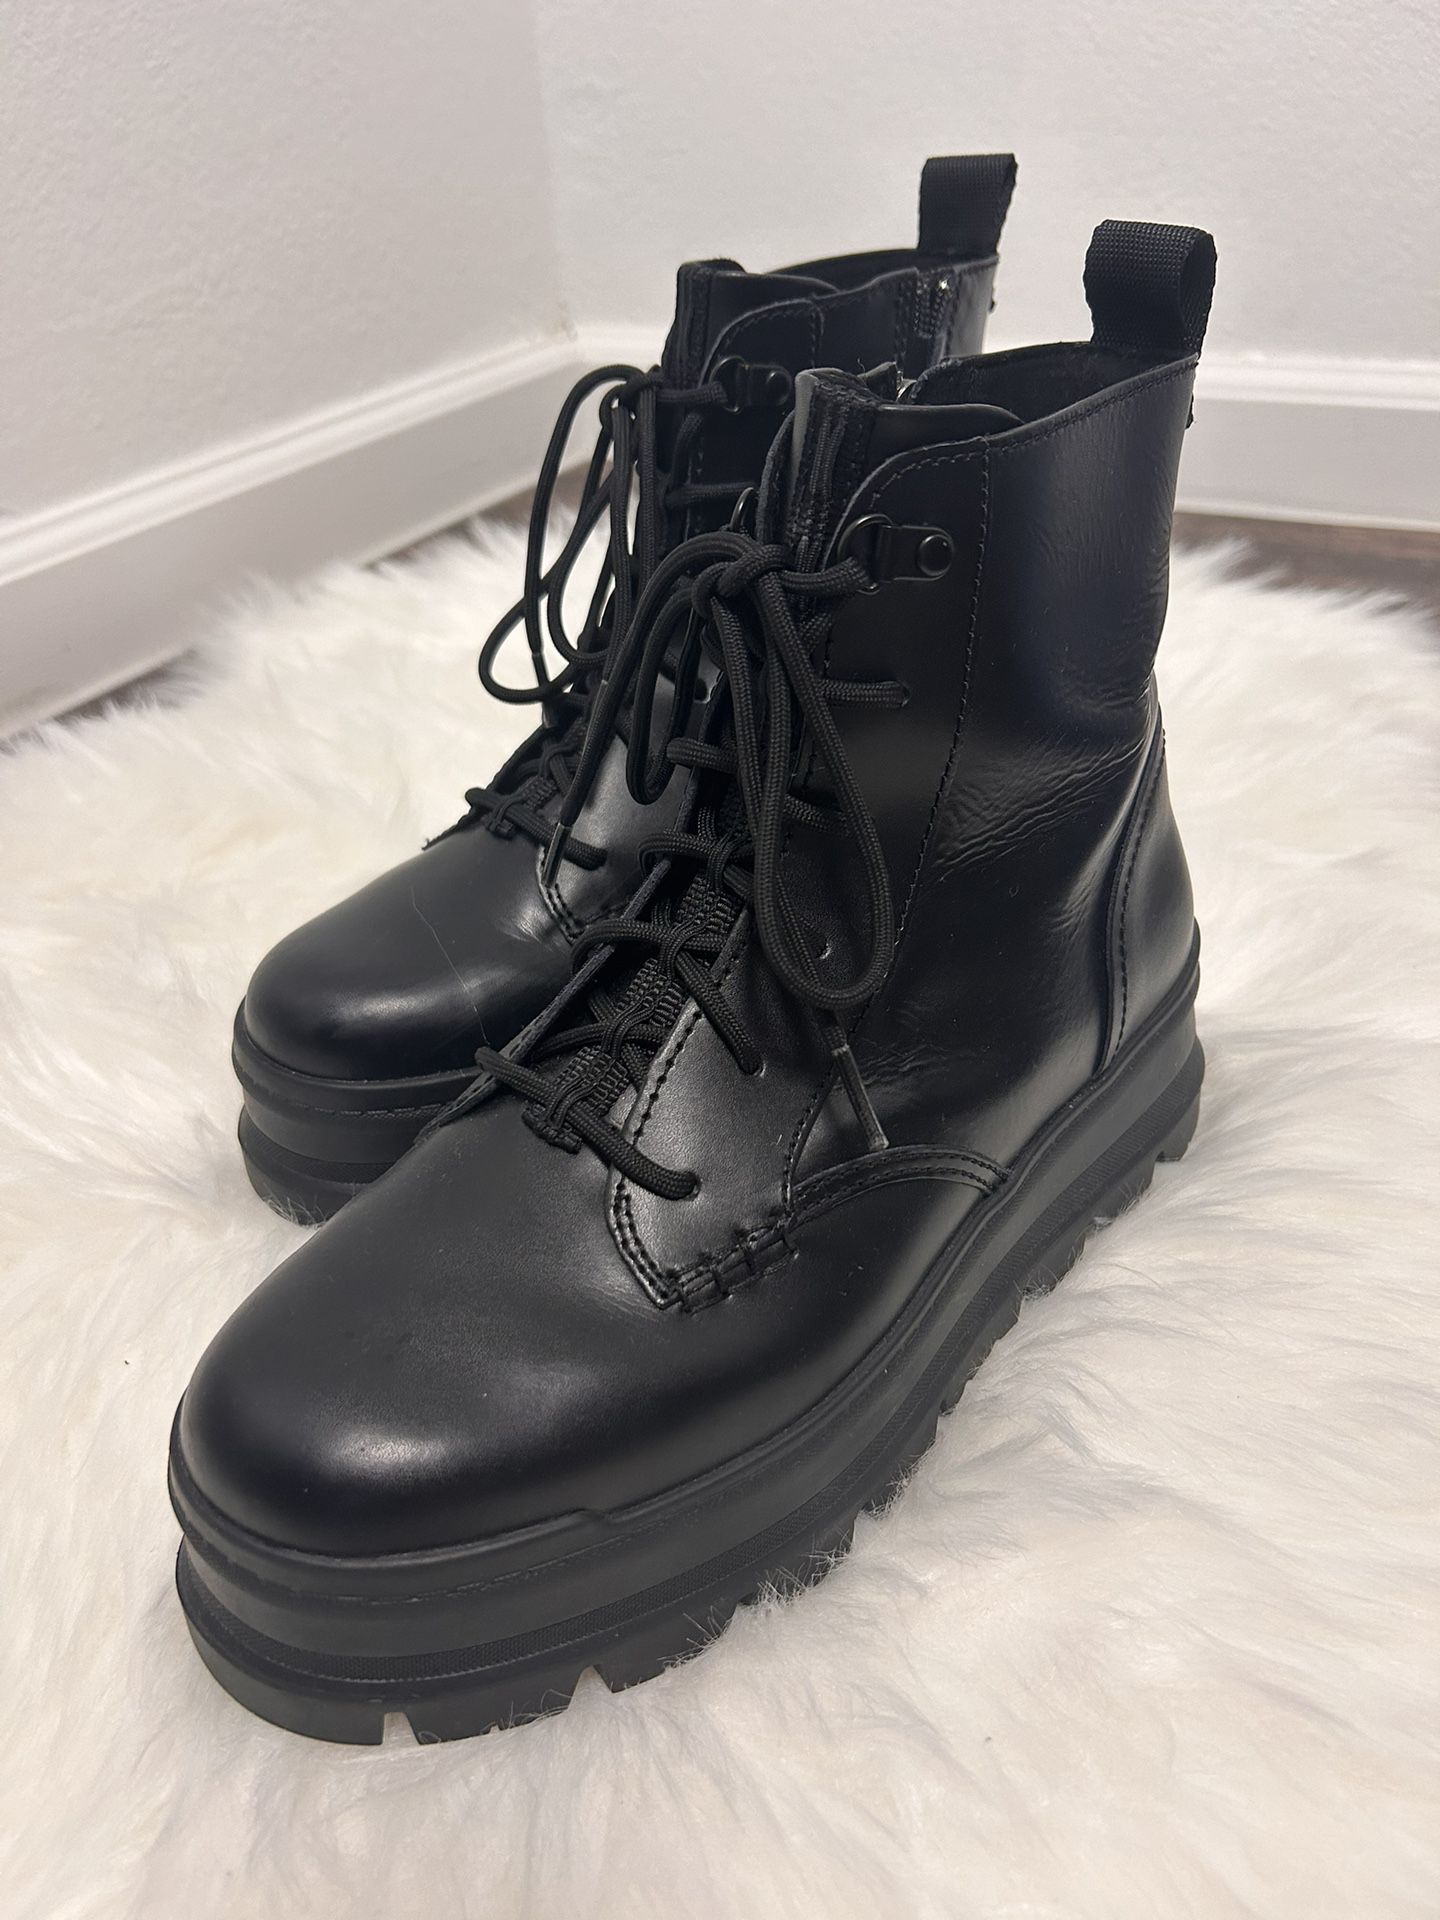 UGG COMBAT BOOTS - Size 9 - Women's 